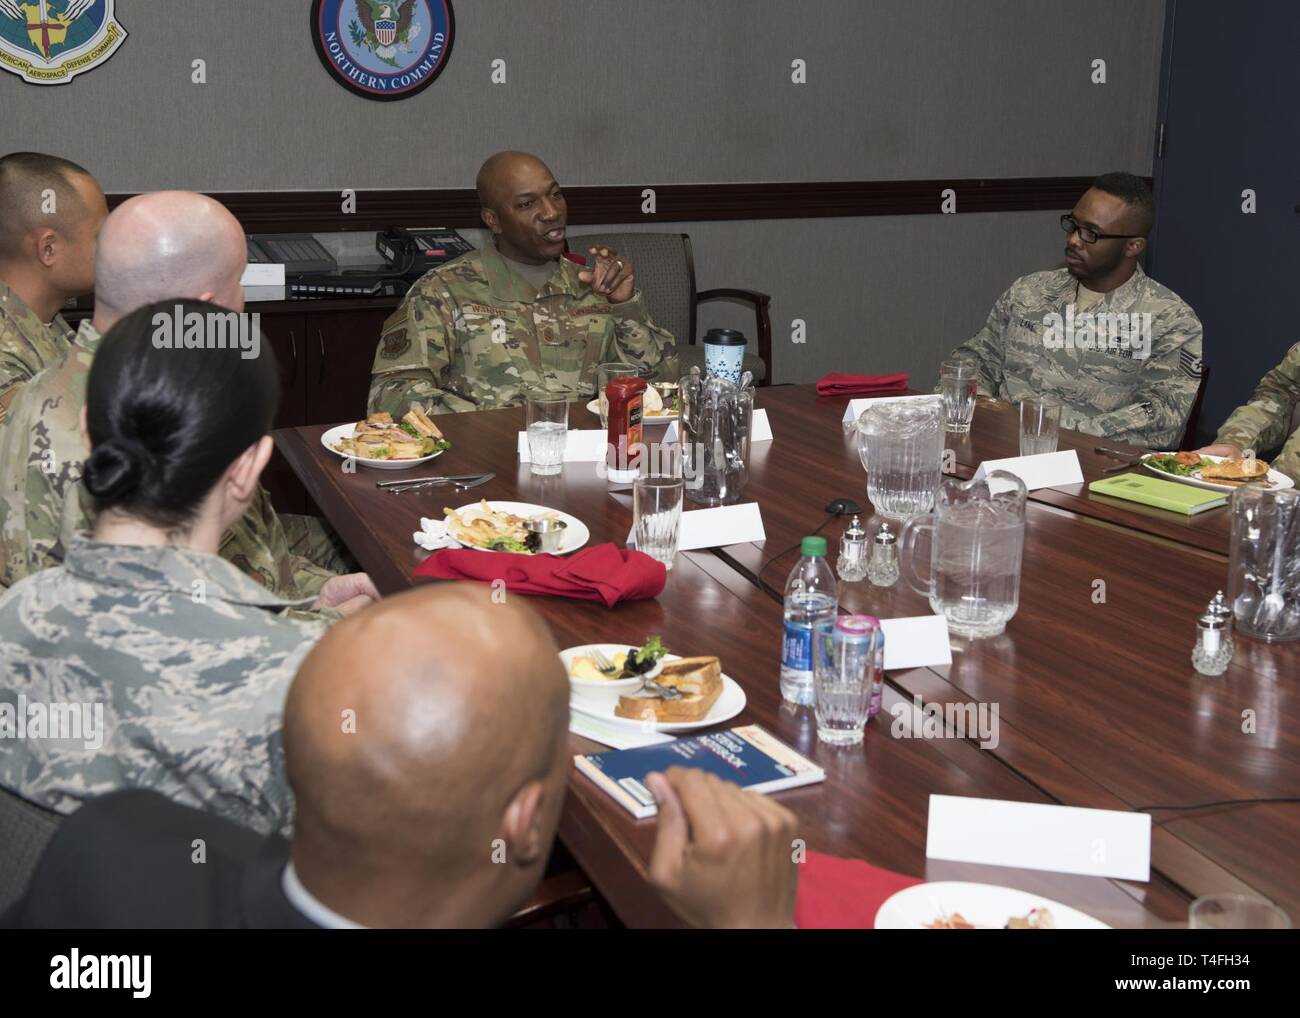 Chief Master Sergeant of the Air Force, Kaleth O. Wright speaks with Junior Enlisted and Non-Commissioned Officers during an informal lunch at the North American Aerospace Defense Command and U.S. Northern Command headquarters in Colorado Springs, Colorado, April 10, 2019. Chief Wright spent the afternoon meeting Airmen assigned to the world's only joint and bi-national command responsible for protecting and defending the homeland. Stock Photo